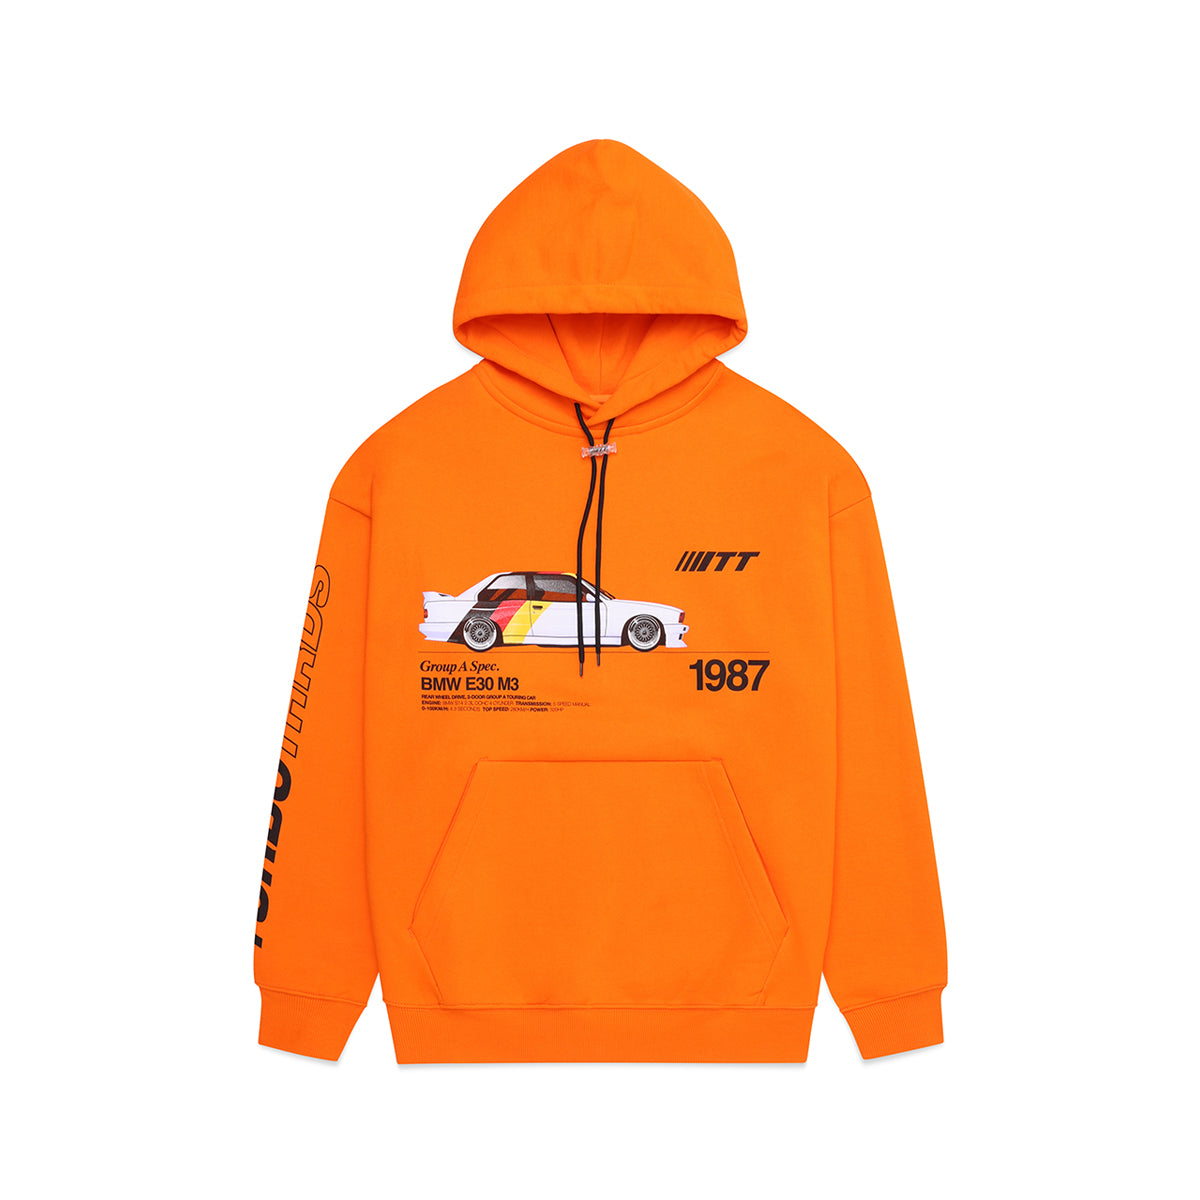 Turbo Threads scarlet orange standard fit hoodie with a BMW E30 M3 graphic and black TT logo on sleeve